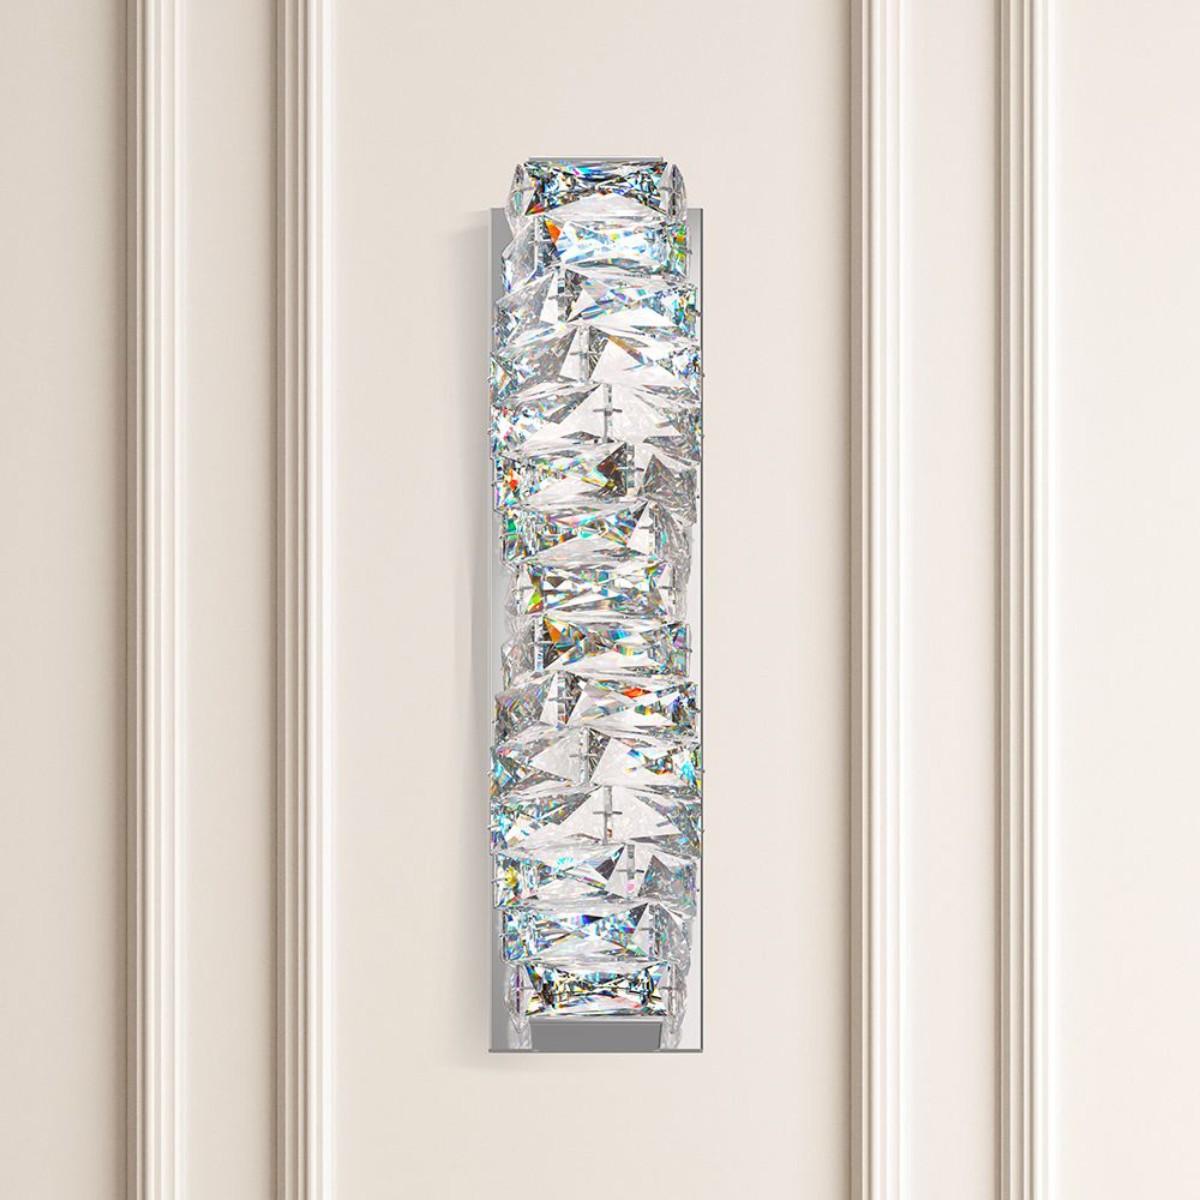 Glissando LED 18 inch. Stainless Steel Flush Mount Sconce with Crystals from Swarovski - Bees Lighting